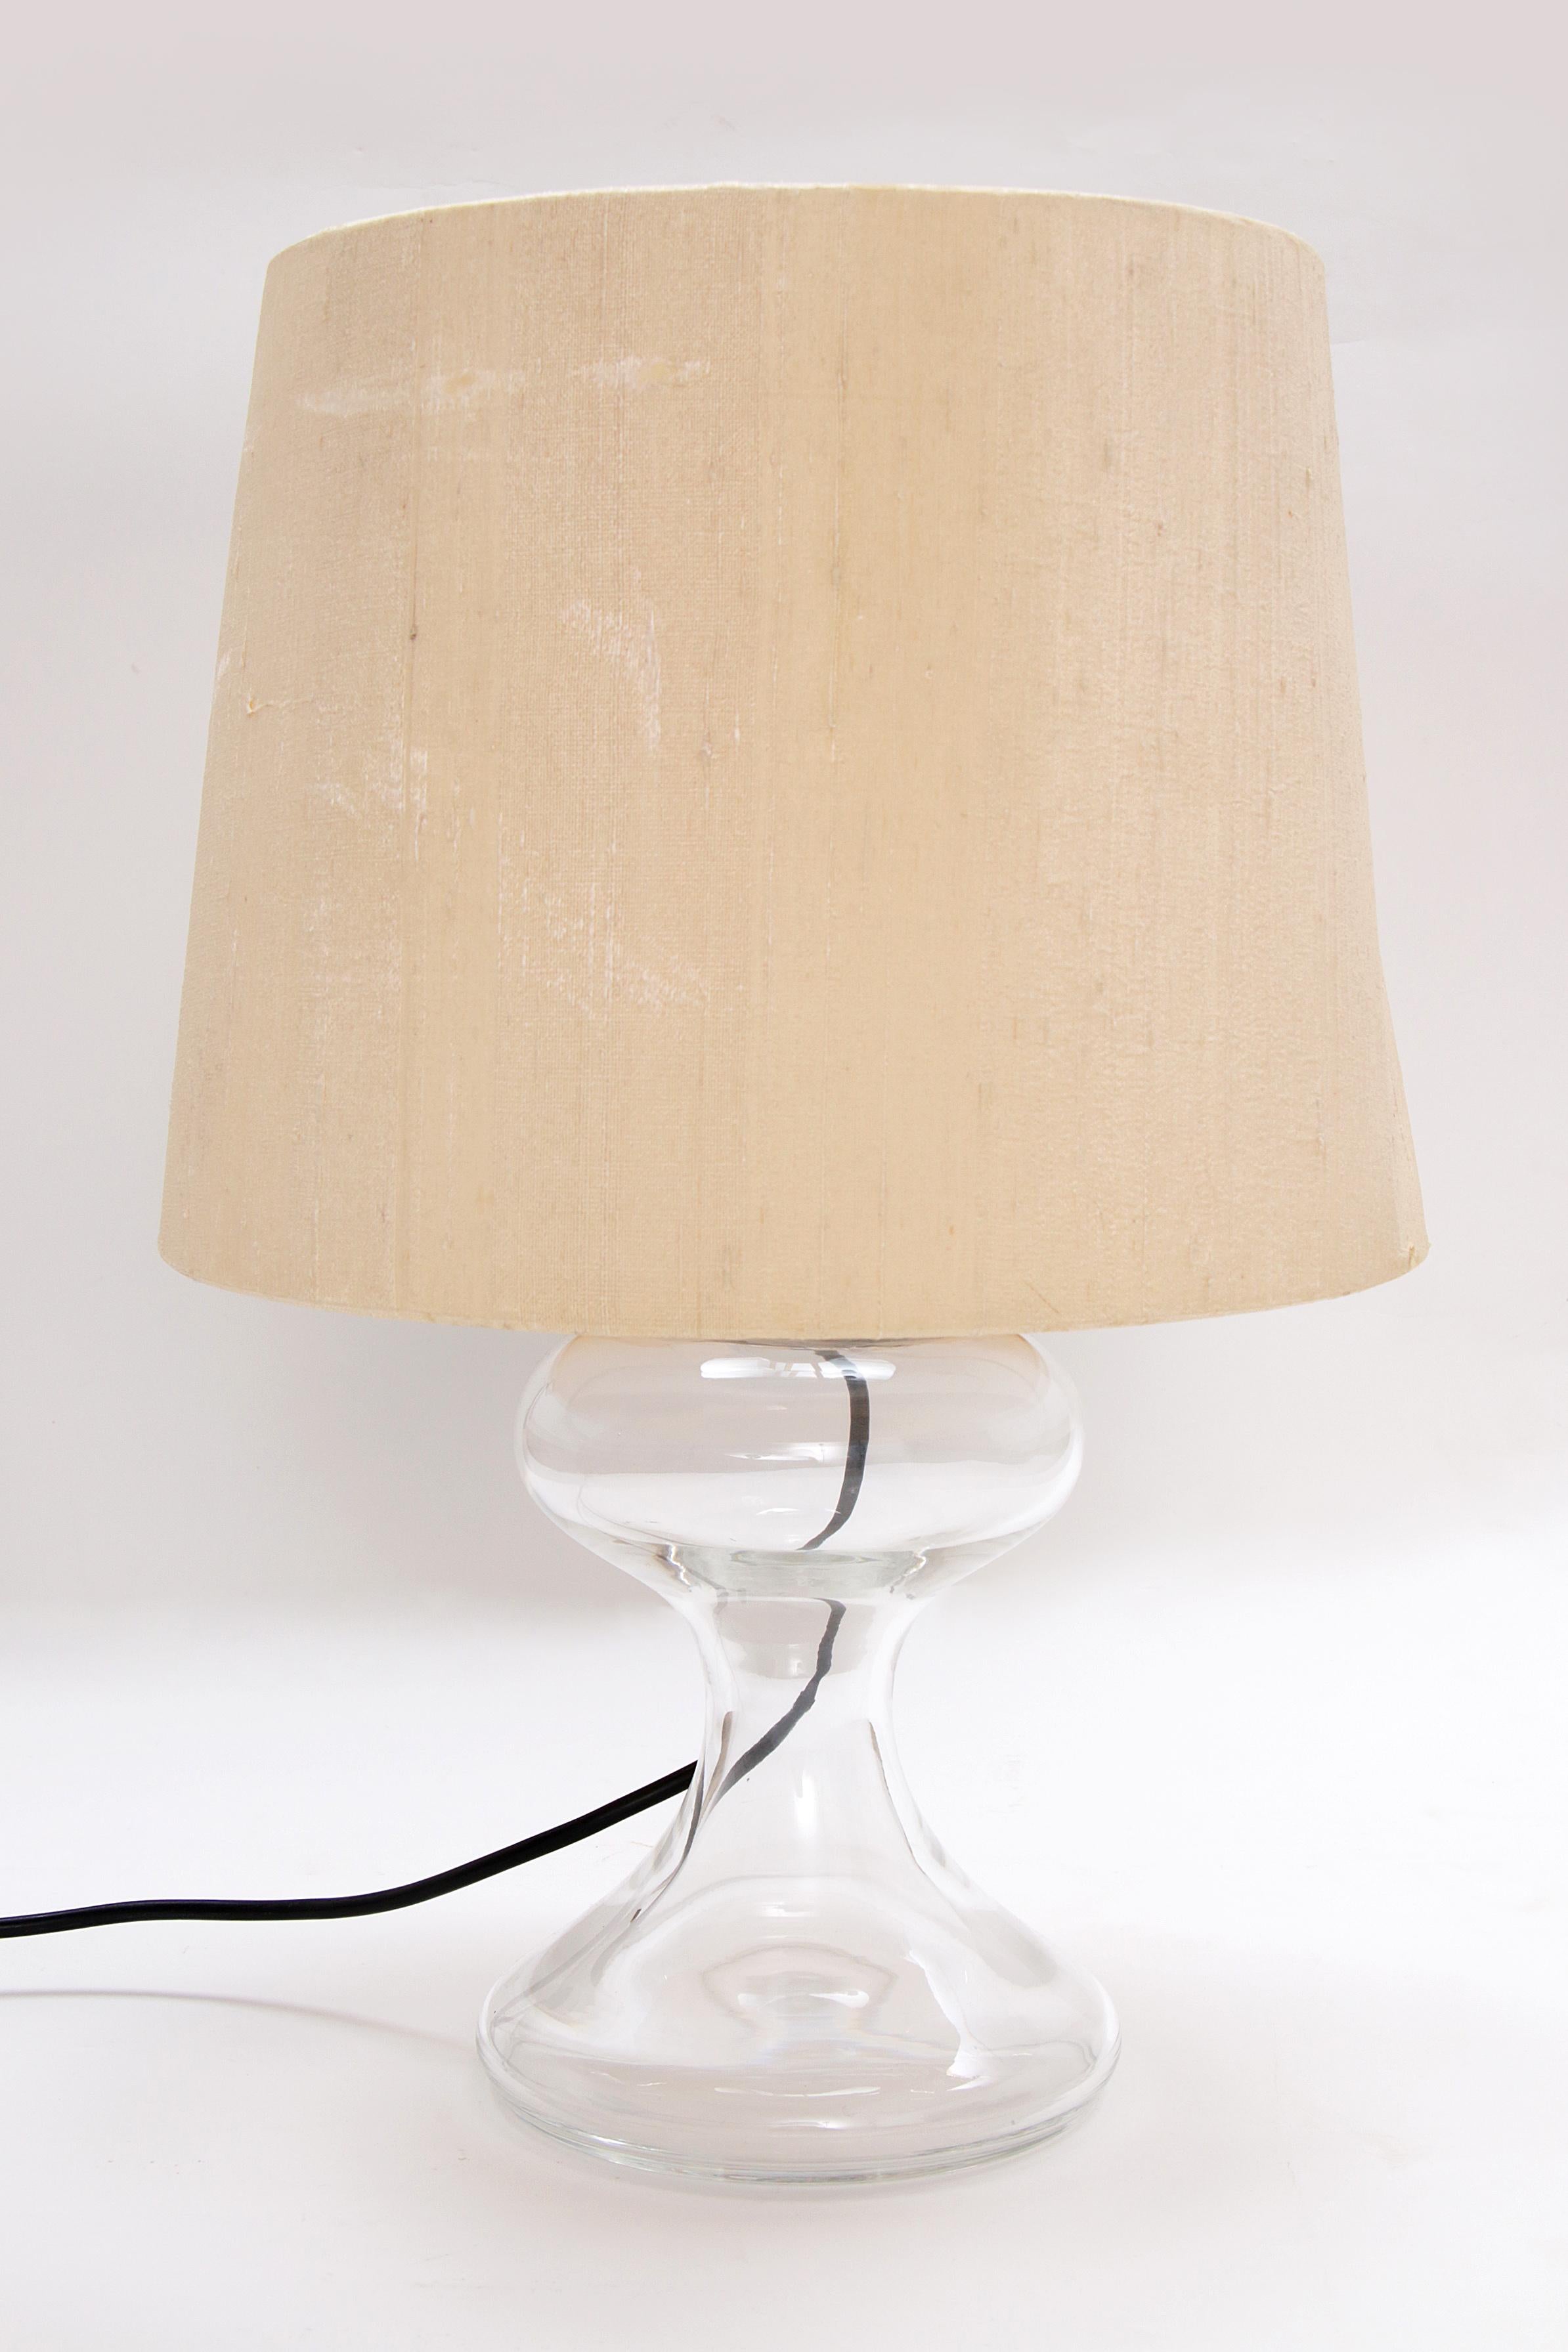 Late 17th Century Ingo Maurer ML1 Table Lamp - Mouth-blown Design Lighting For Sale